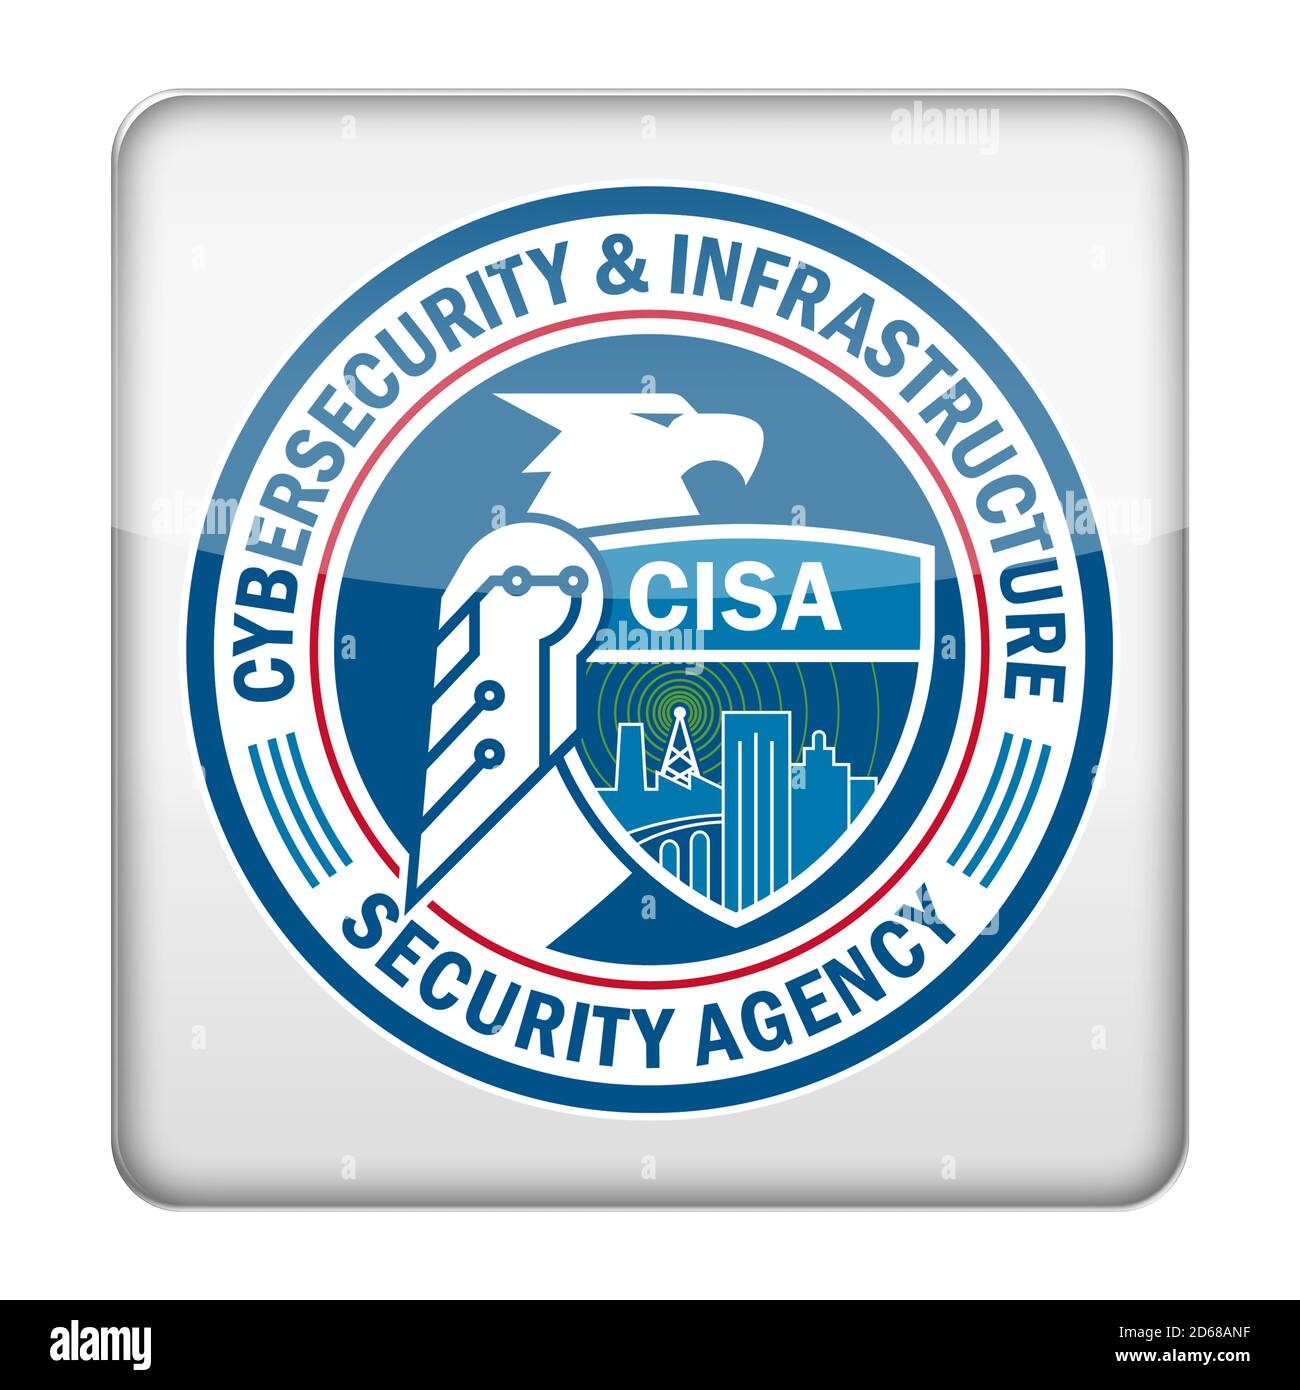 Cybersecurity Infrastructure Security Agency CISA logo Stock Photo